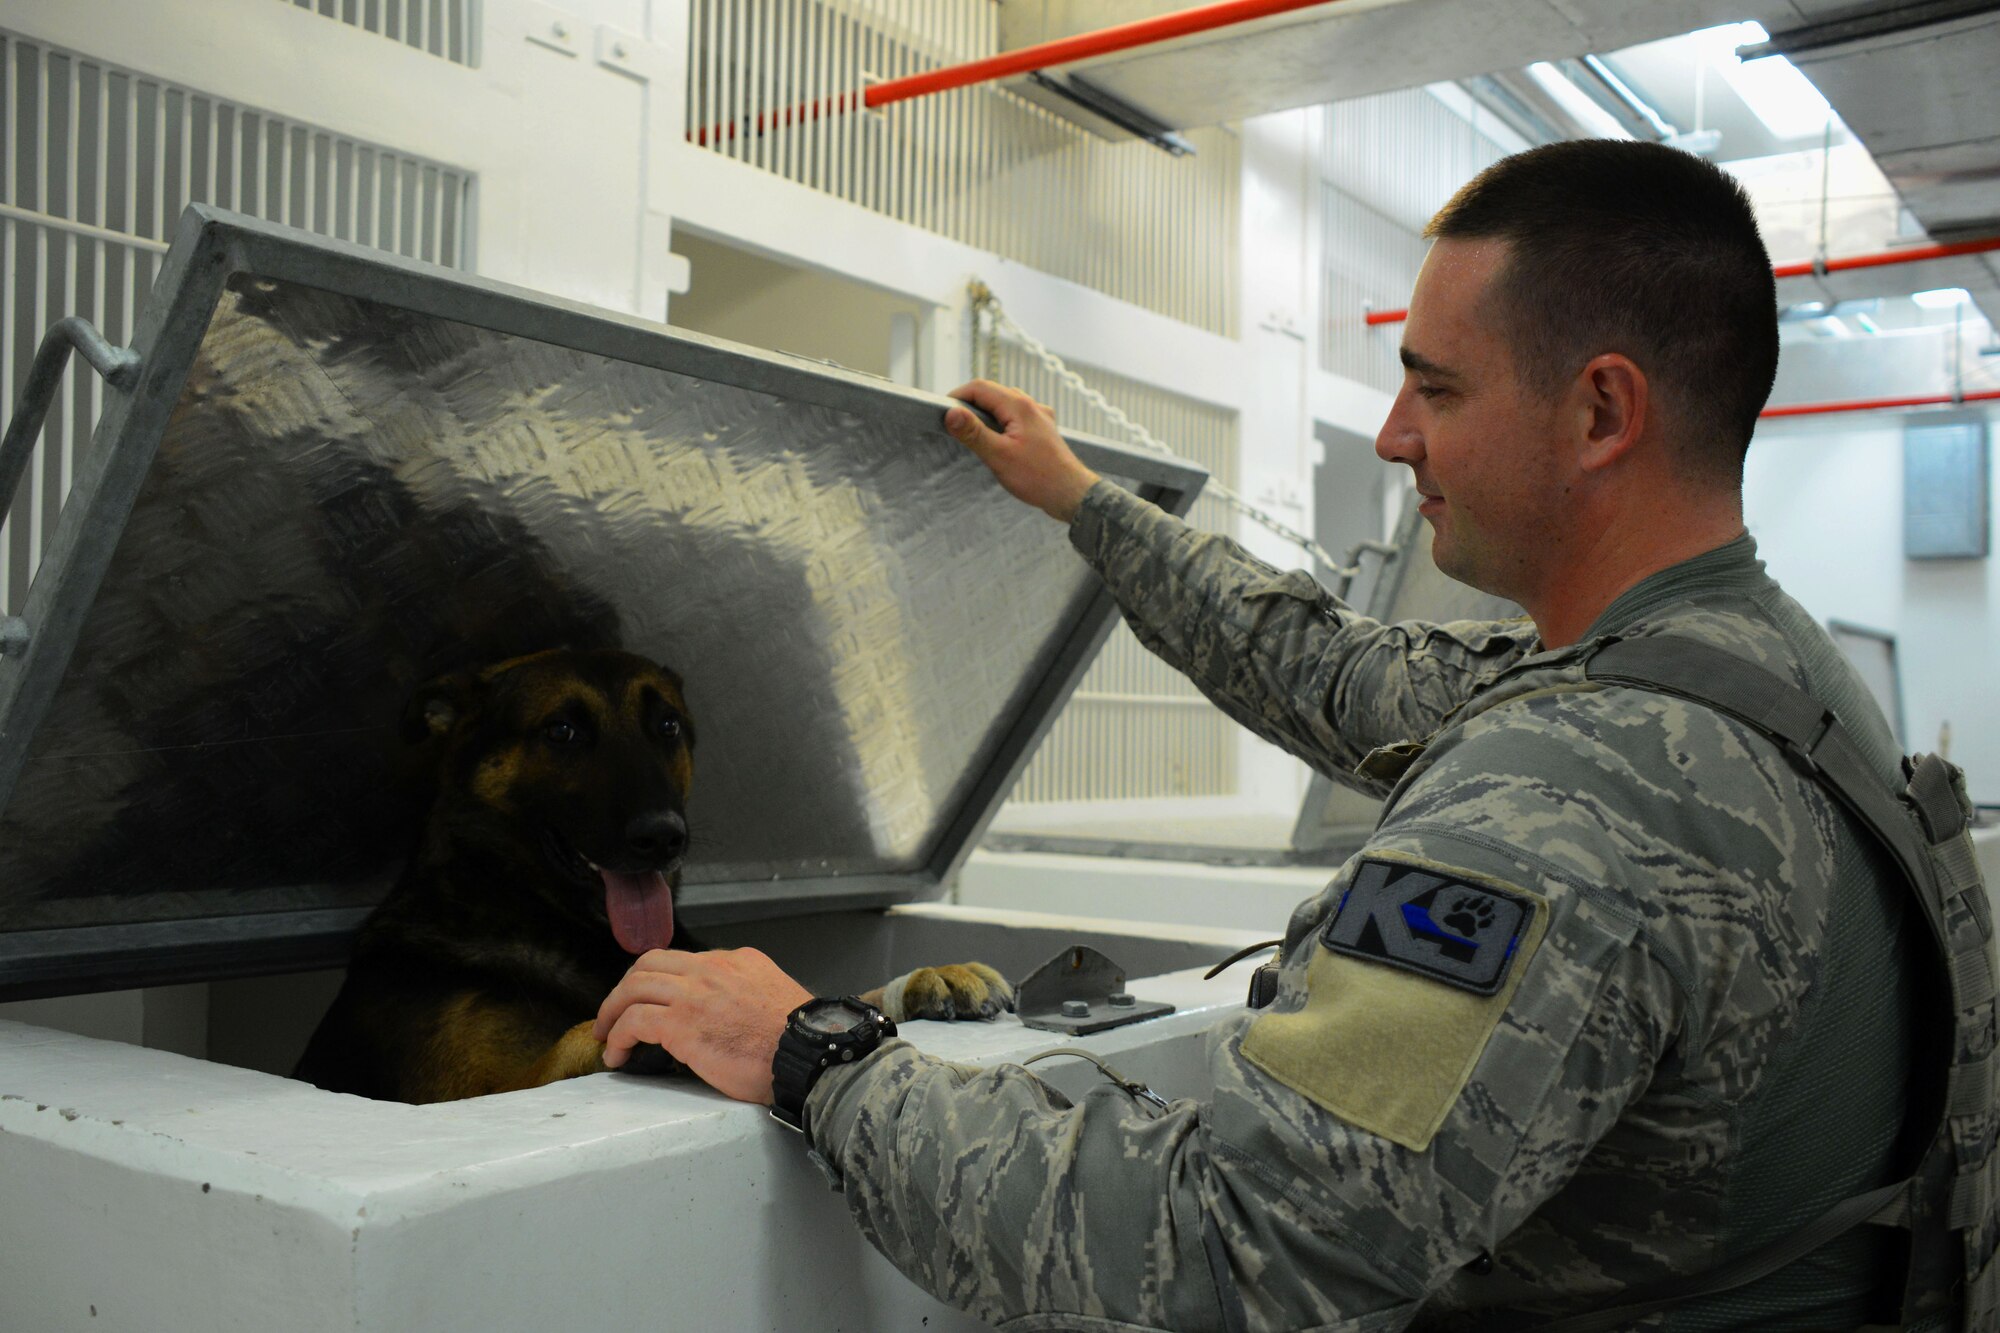 Staff Sgt. Jacob Brown, 379th Expeditionary Security Forces Squadron military working dog handler, prepares his dog, Grim, for training Sept. 15, 2016, at Al Udeid Air Base, Qatar. MWDs and their handlers directly support the Vehicle Search Area and detection sweeps around critical assets on base. They patrol all of the coalition facilities regularly to ensure the safety of Team AUAB. (U.S. Air Force photo/Senior Airman Melissa Buonanducci/Released)